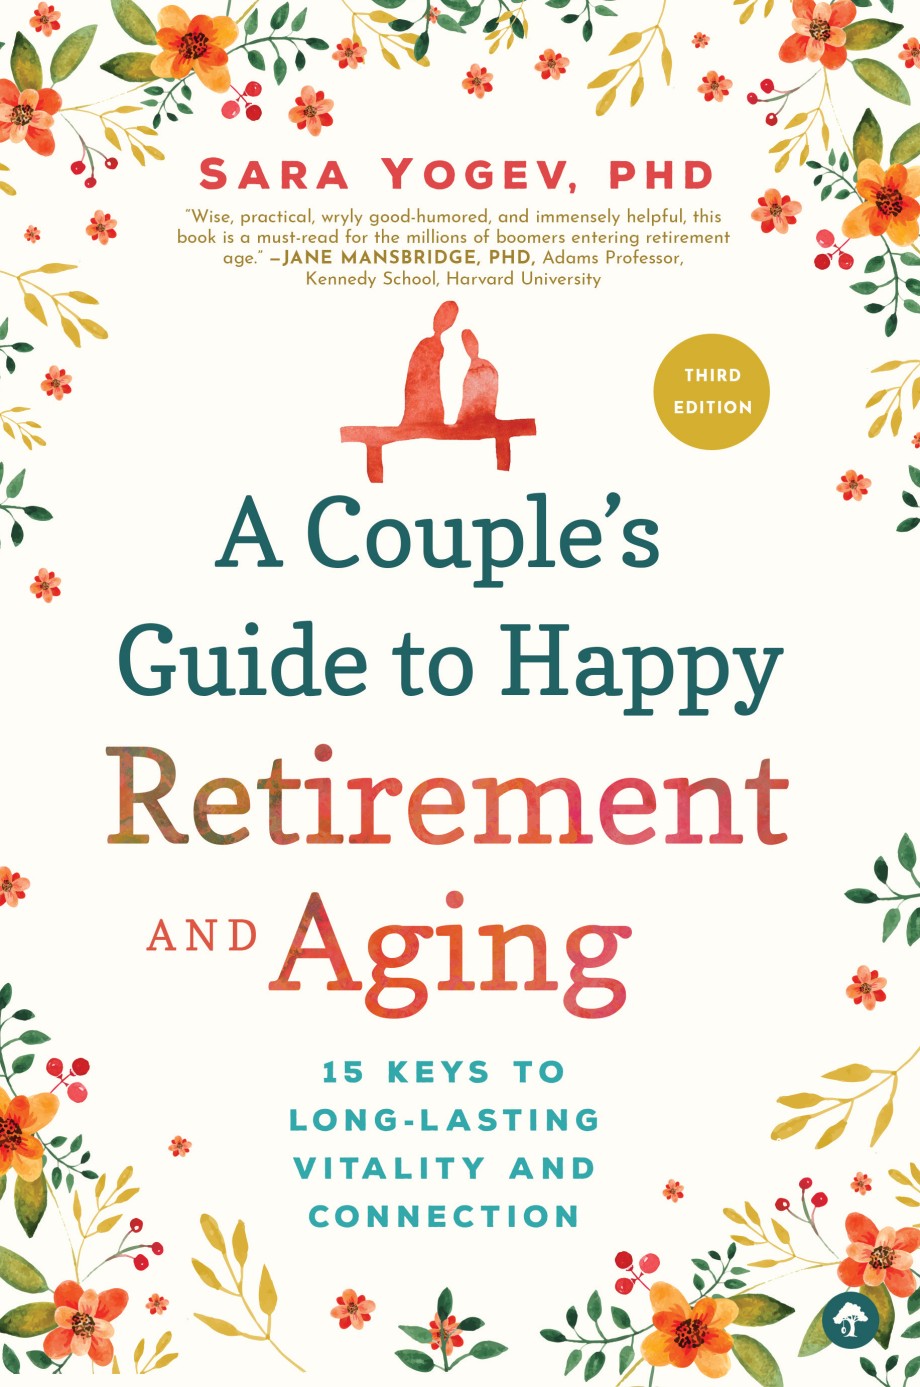 Couple's Guide to Happy Retirement and Aging 15 Keys to Long-Lasting Vitality and Connection